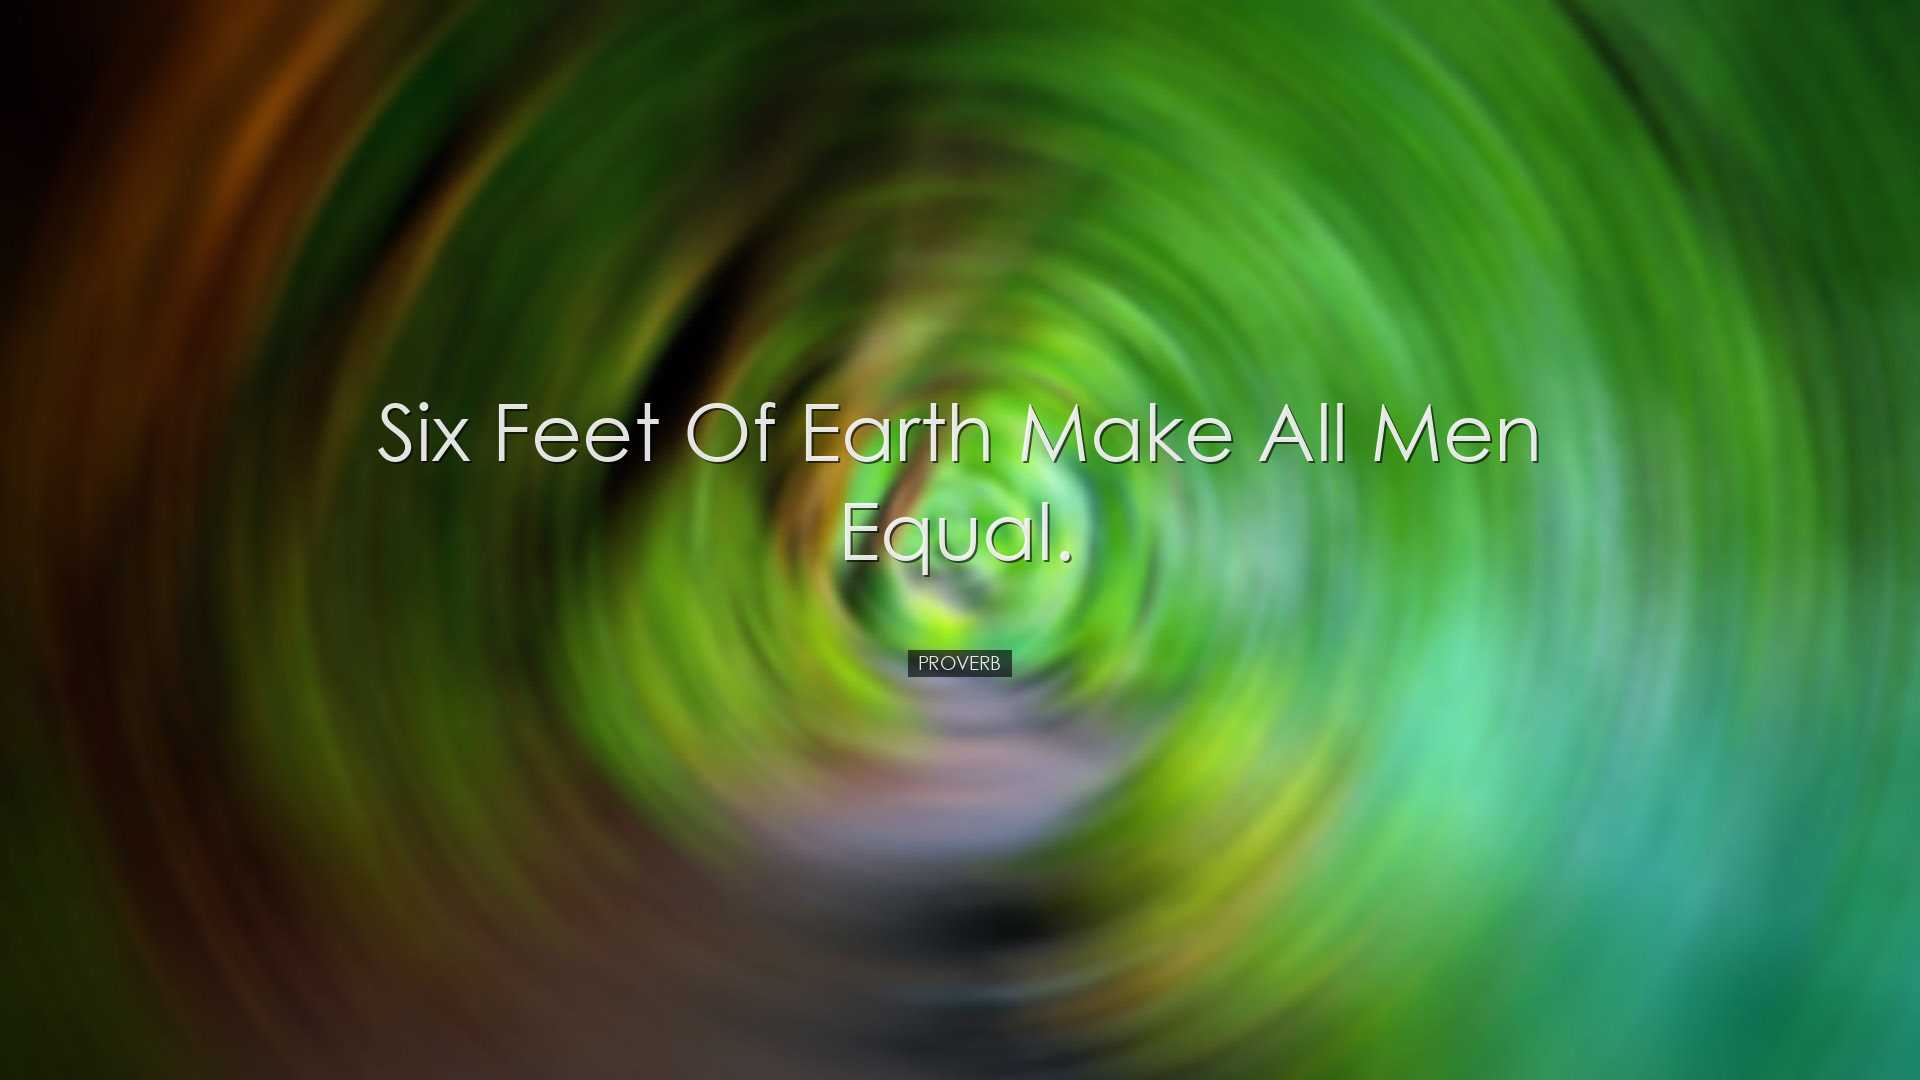 Six feet of earth make all men equal. - Proverb